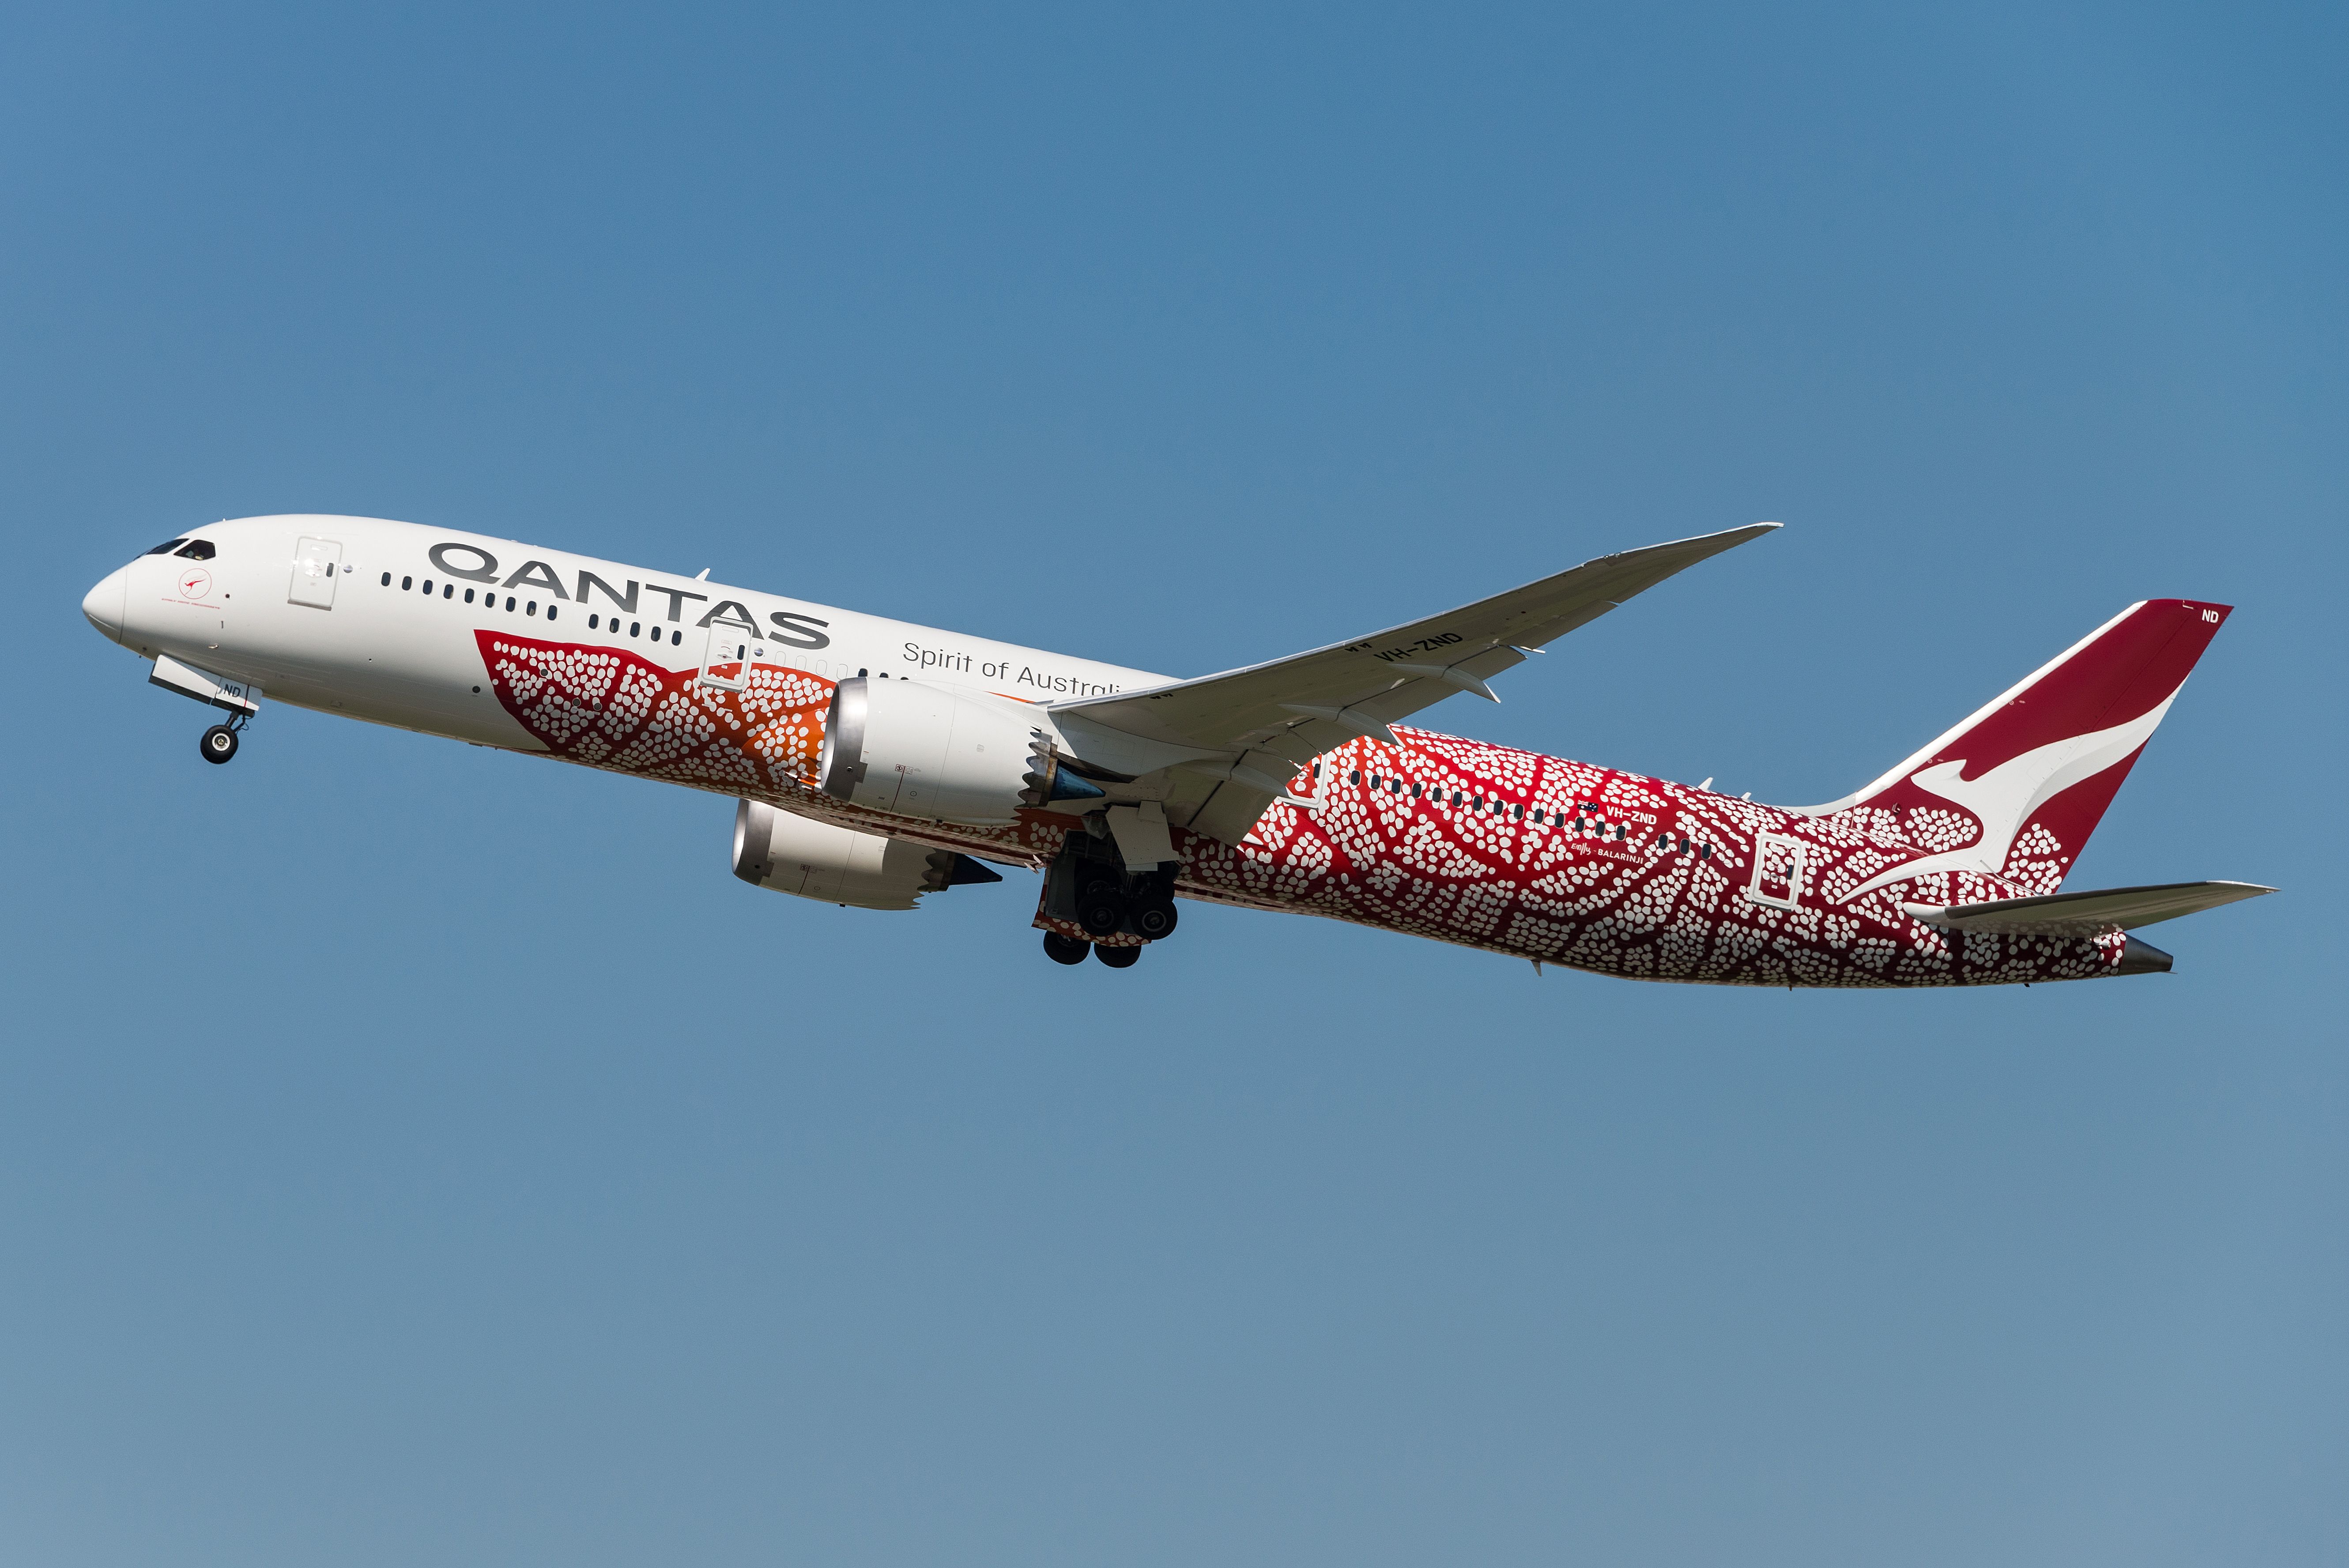 A Qantas Boeing 787 flying in the sky.